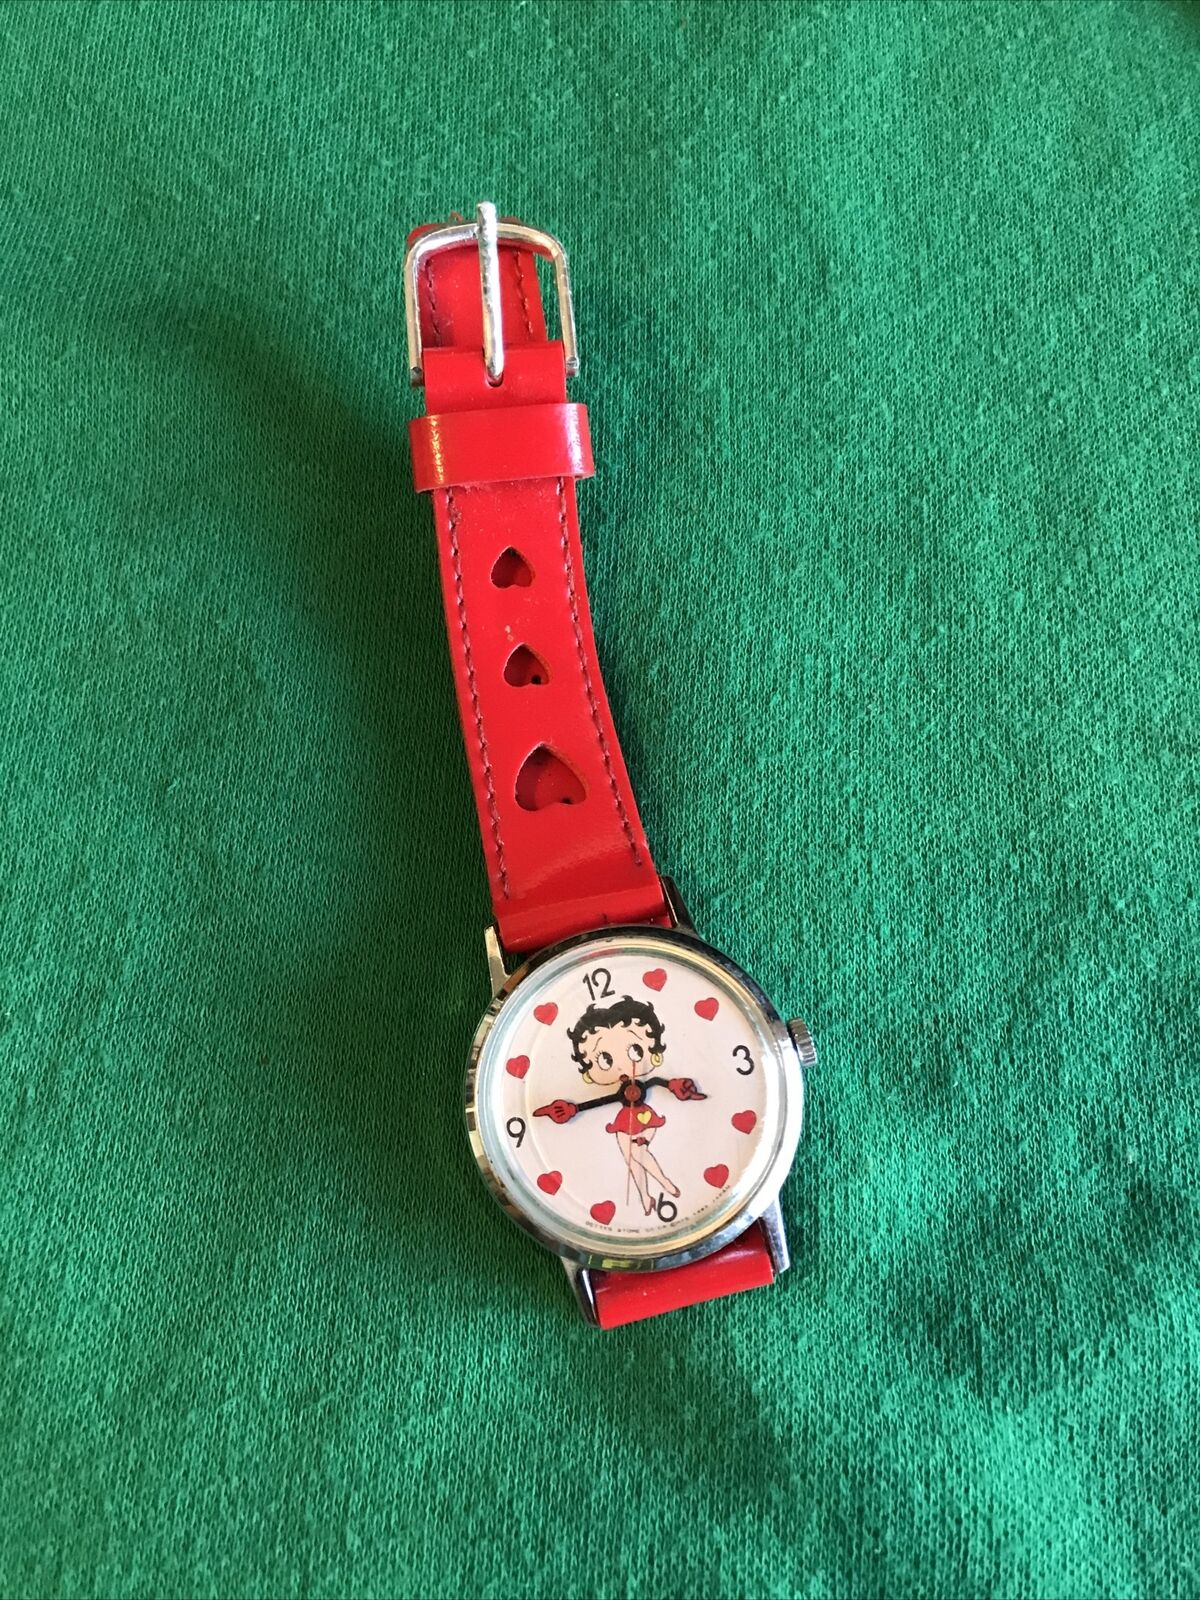 Vintage 1985 Betty Boop Heart Watch (tested/works)